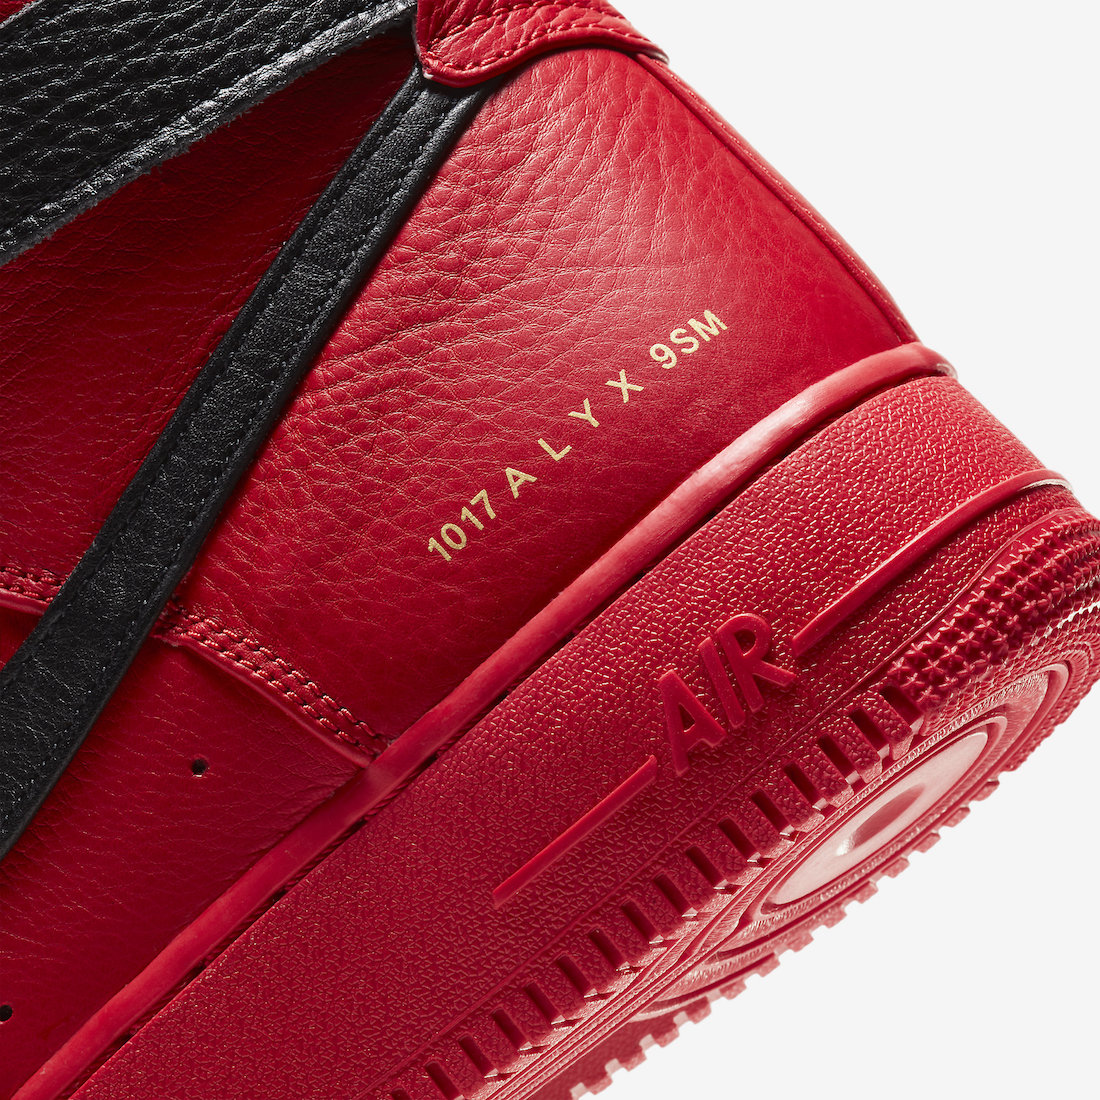 Matthew M Williams Alyx Nike Air Force 1 High University Red CQ4018-601 Release Date